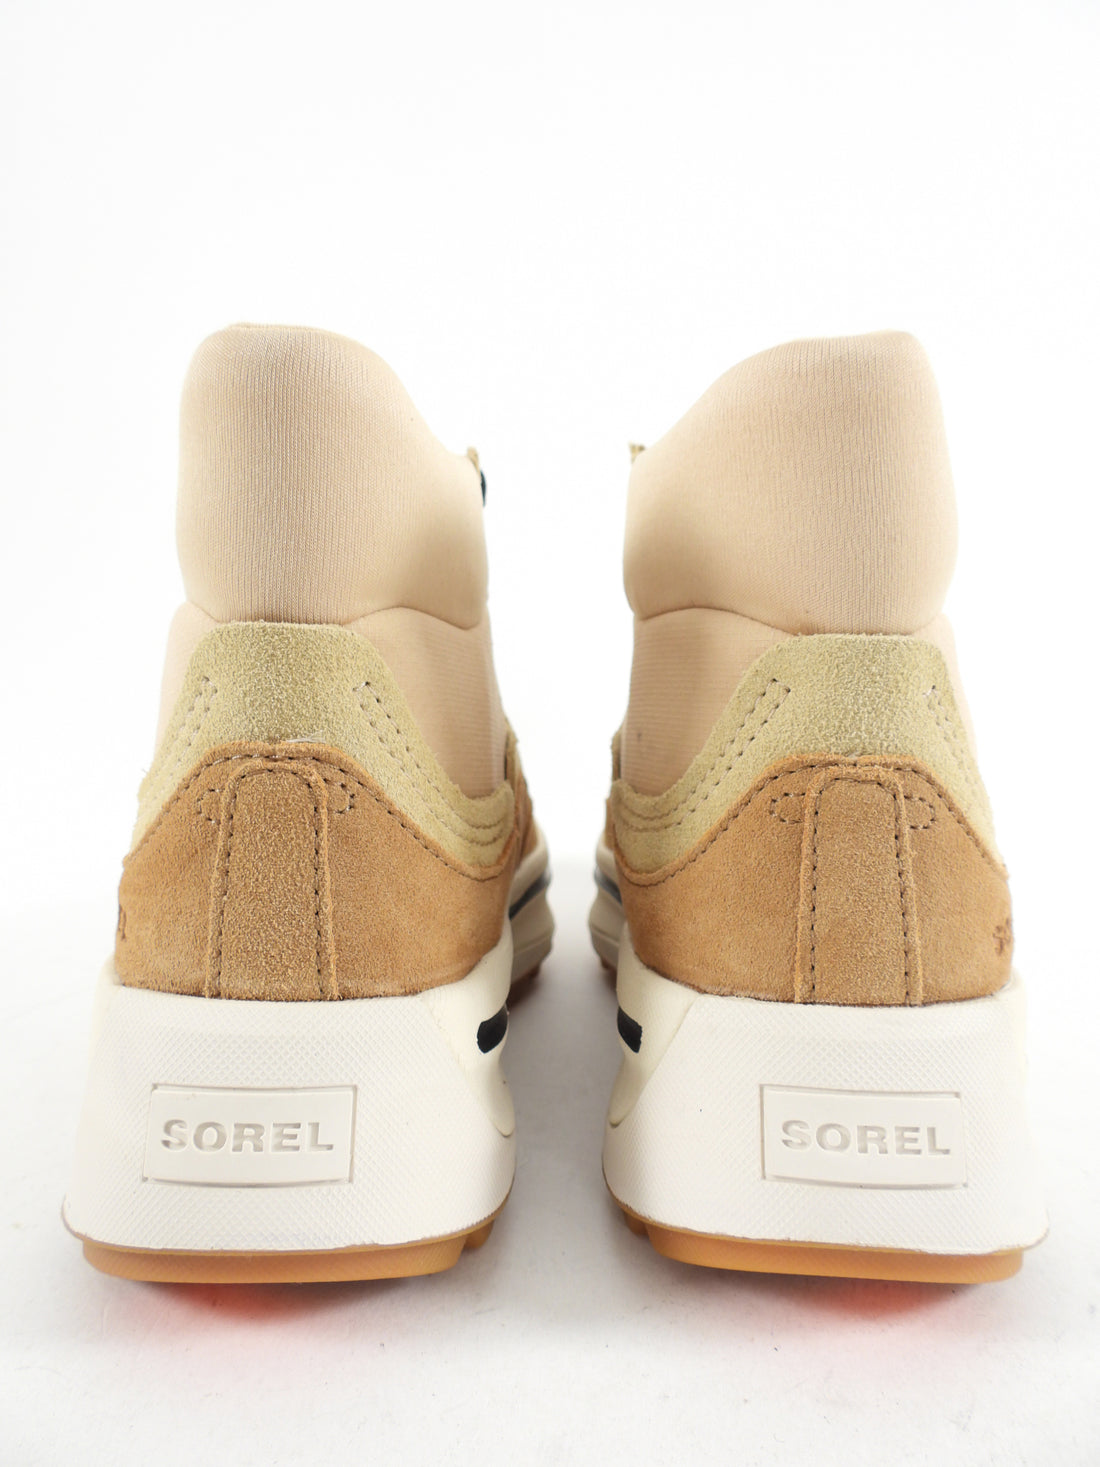 Sorel Beige Lace Up Sneaker Boots - USA 6.5